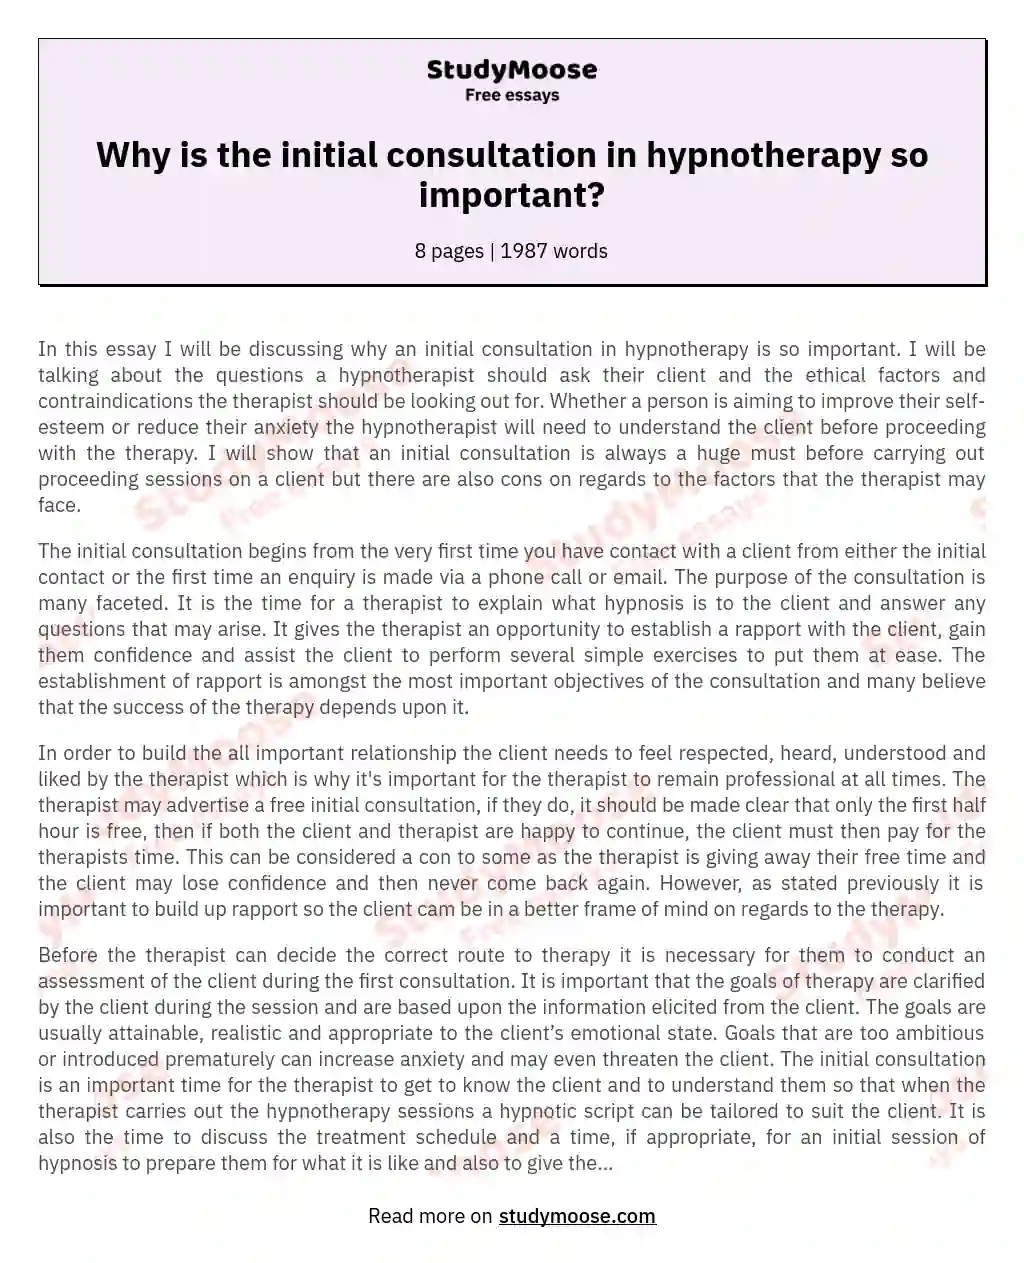 Why is the initial consultation in hypnotherapy so important? essay